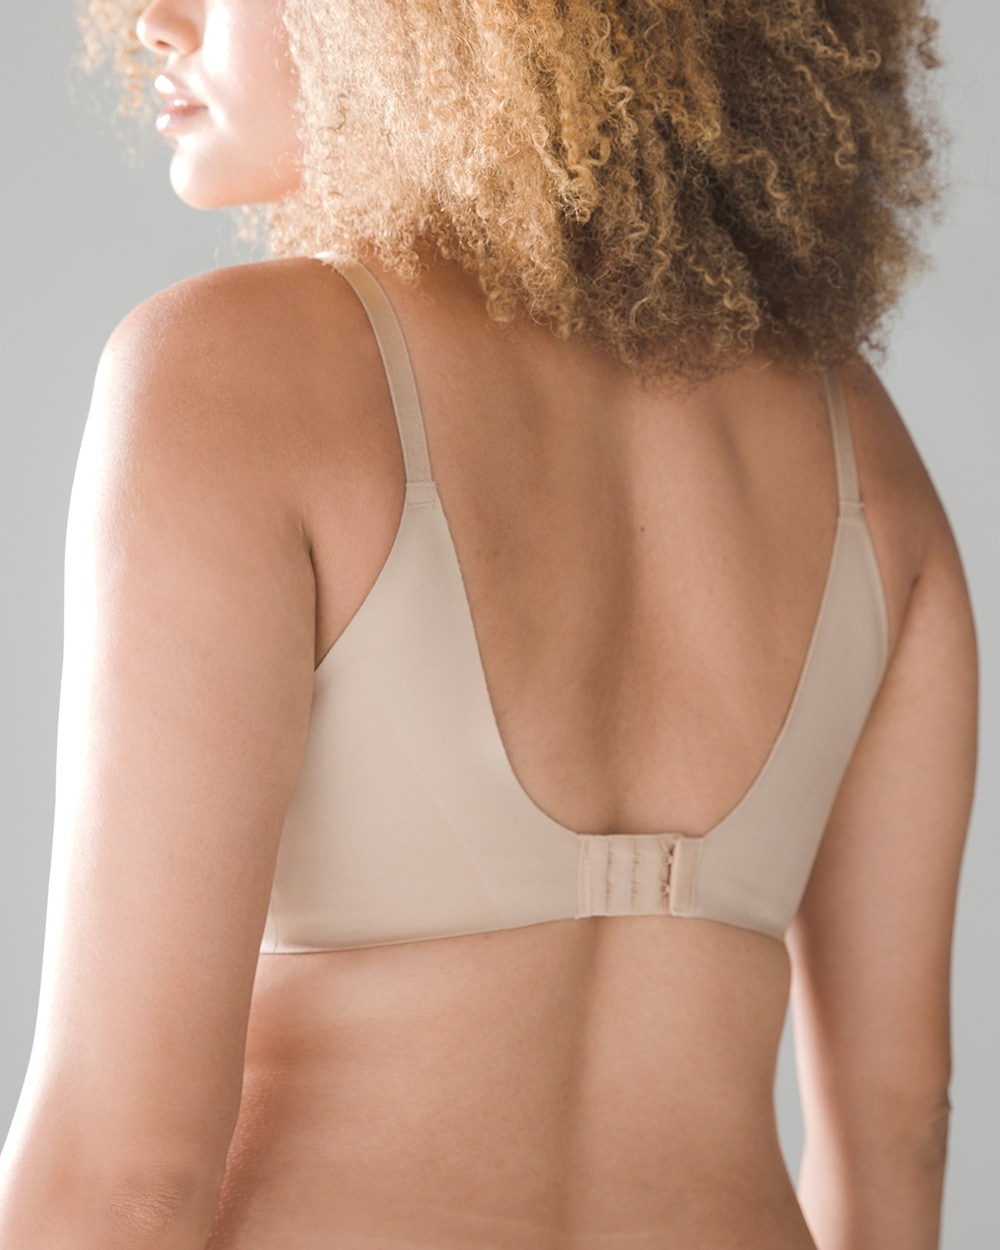 Soma Vanishing Back Unlined Front Close Bra Review, Price and Features -  Pros and Cons of Soma Vanishing Back Unlined Front Close Bra